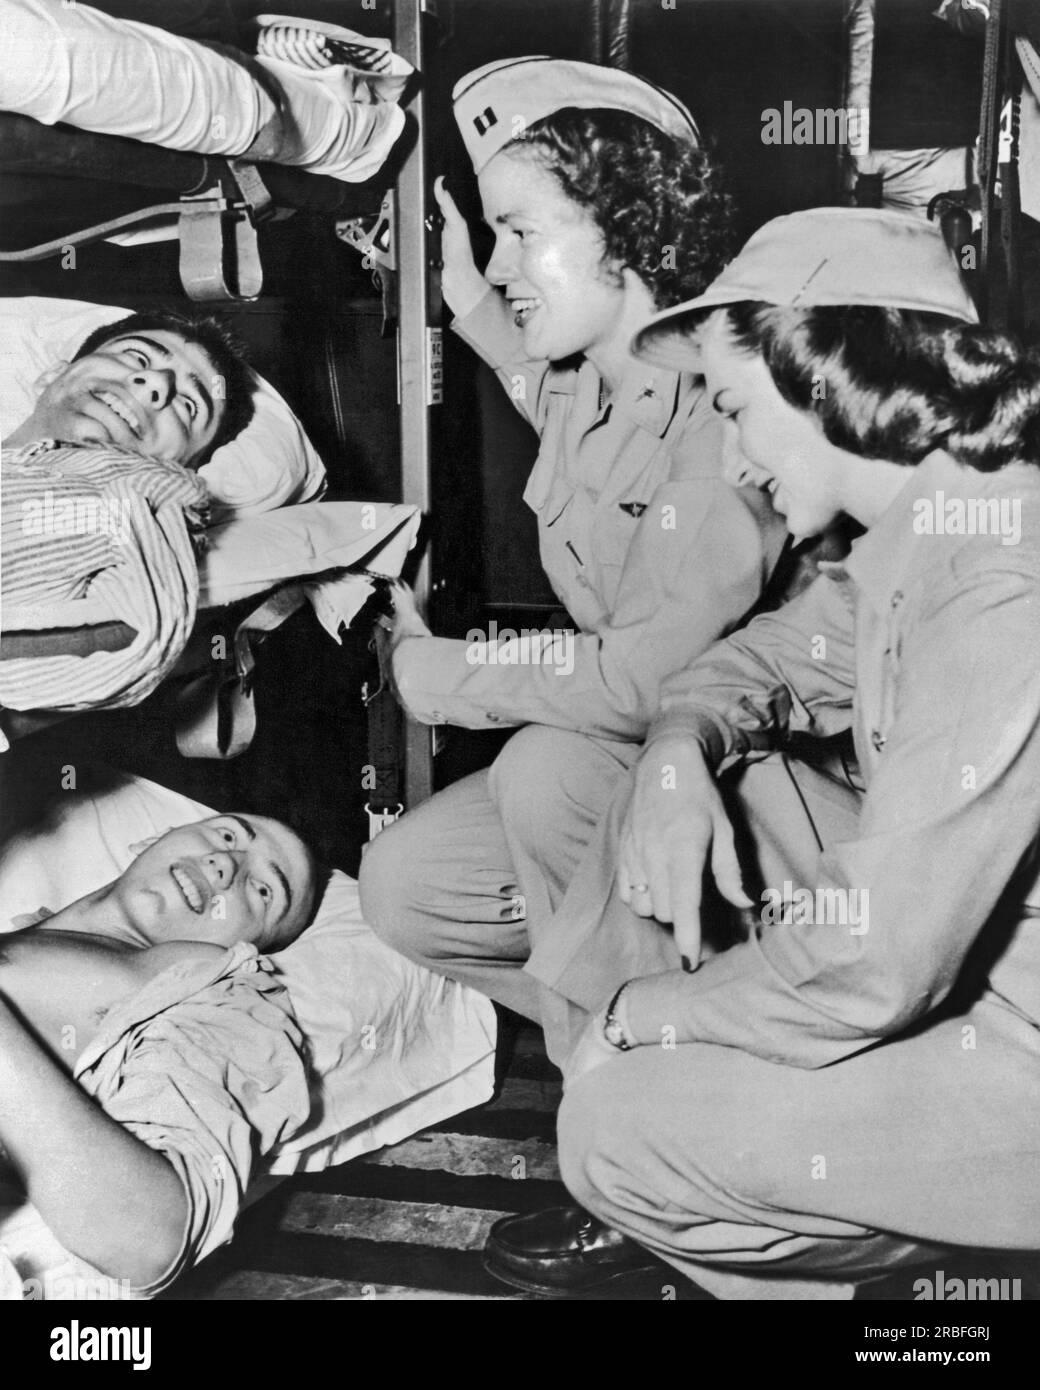 Korea:  April 20, 1951 Two wounded soldiers are comforted by nurses of the air evacuation team. Sixty three patients were transported to California on fifty hour flight on a C-97 transport plane. Stock Photo